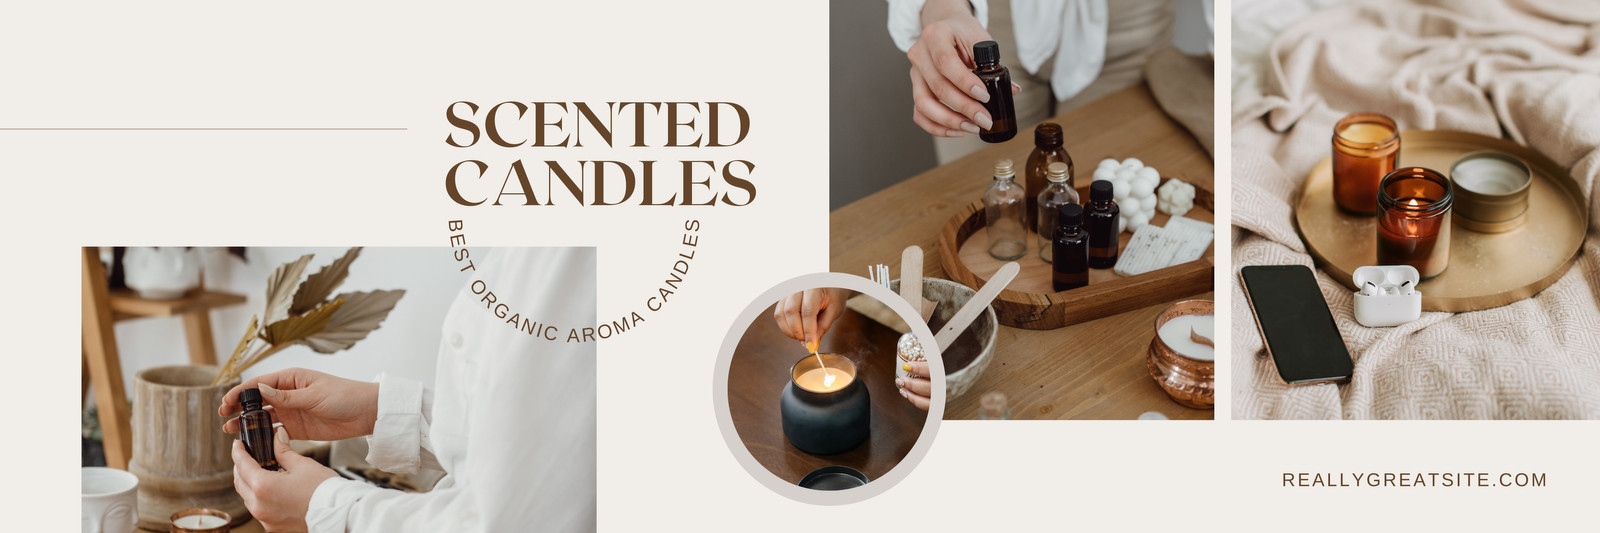 Scented Candles Twitter Header 